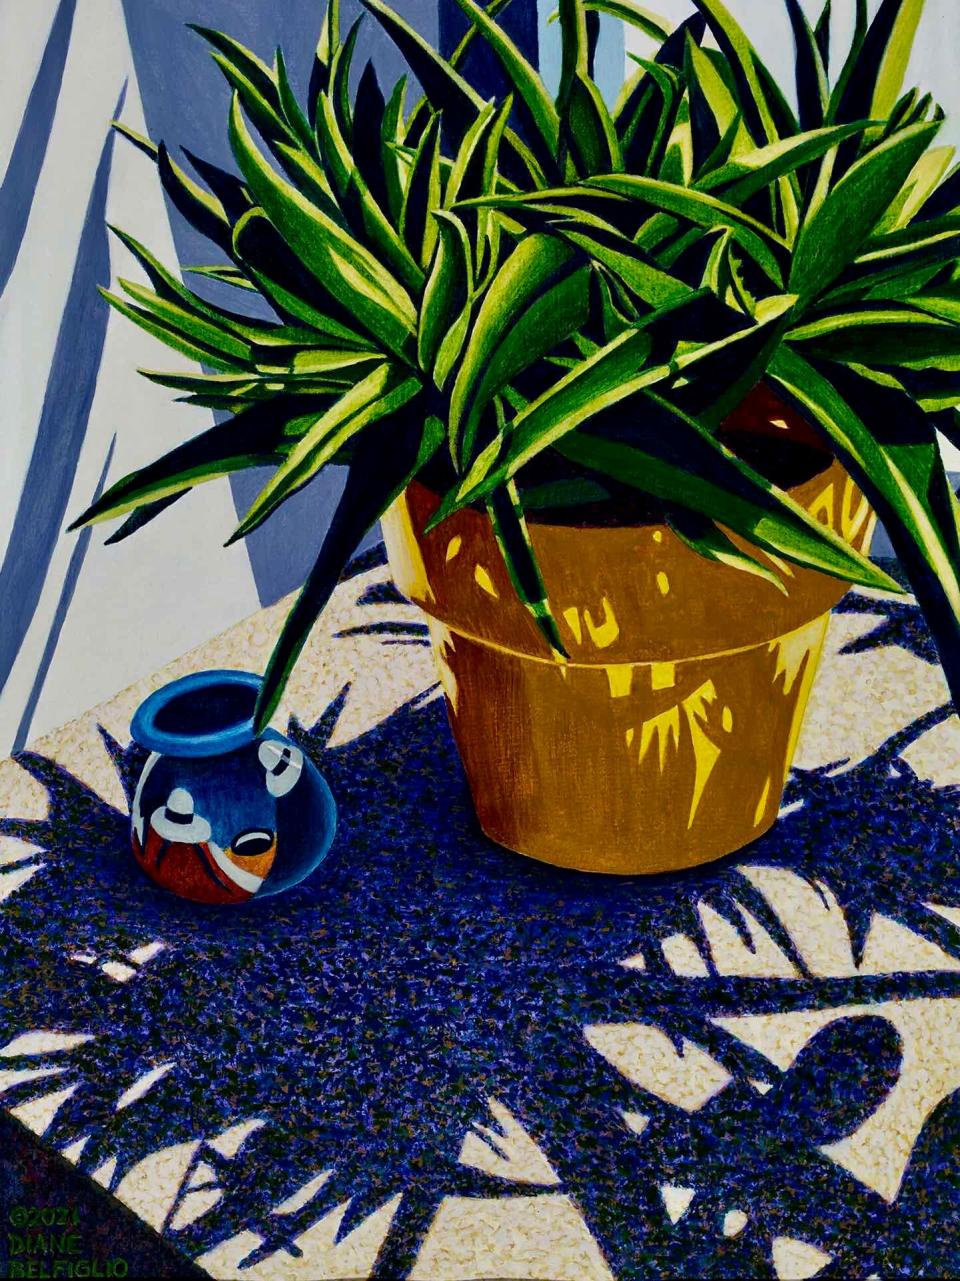 "Succulent Shadows" by Stark County artist Diane Belfiglio is among the paintings accepted and displayed in the Stark County Artists Exhibition at the Massillon Museum. An opening reception is Thursday, and the exhibit runs through Jan. 15.